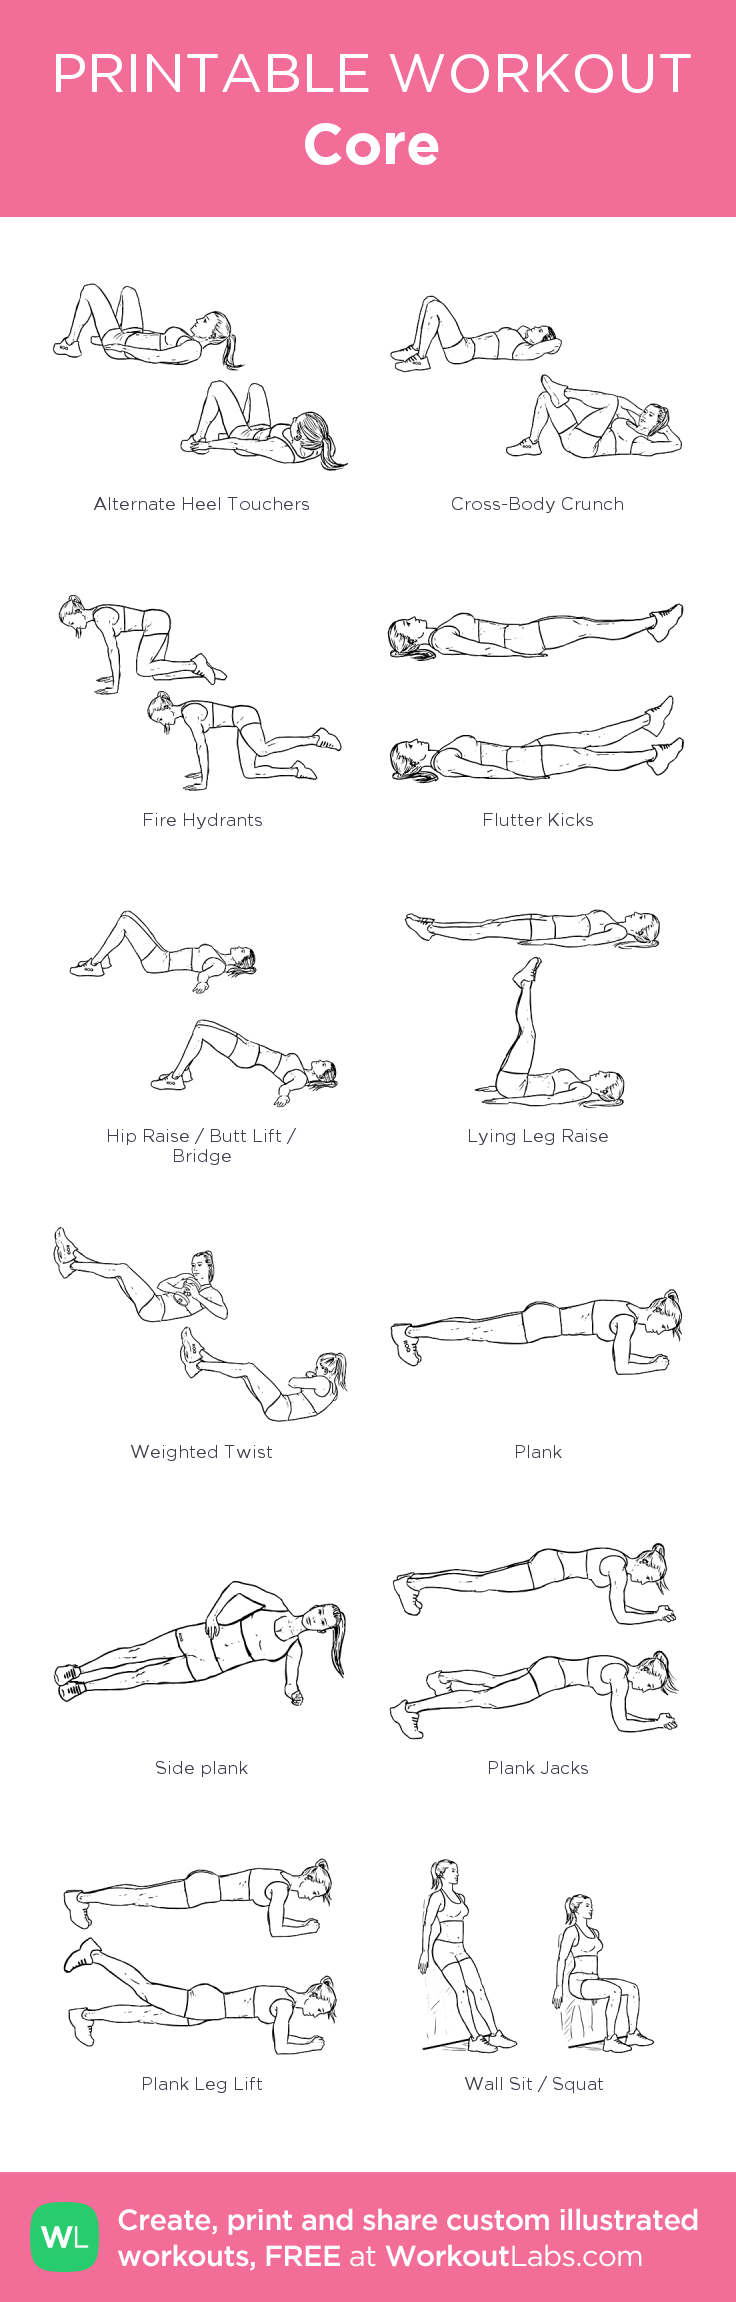 Core: my custom printable workout by @WorkoutLabs #workoutlabs 